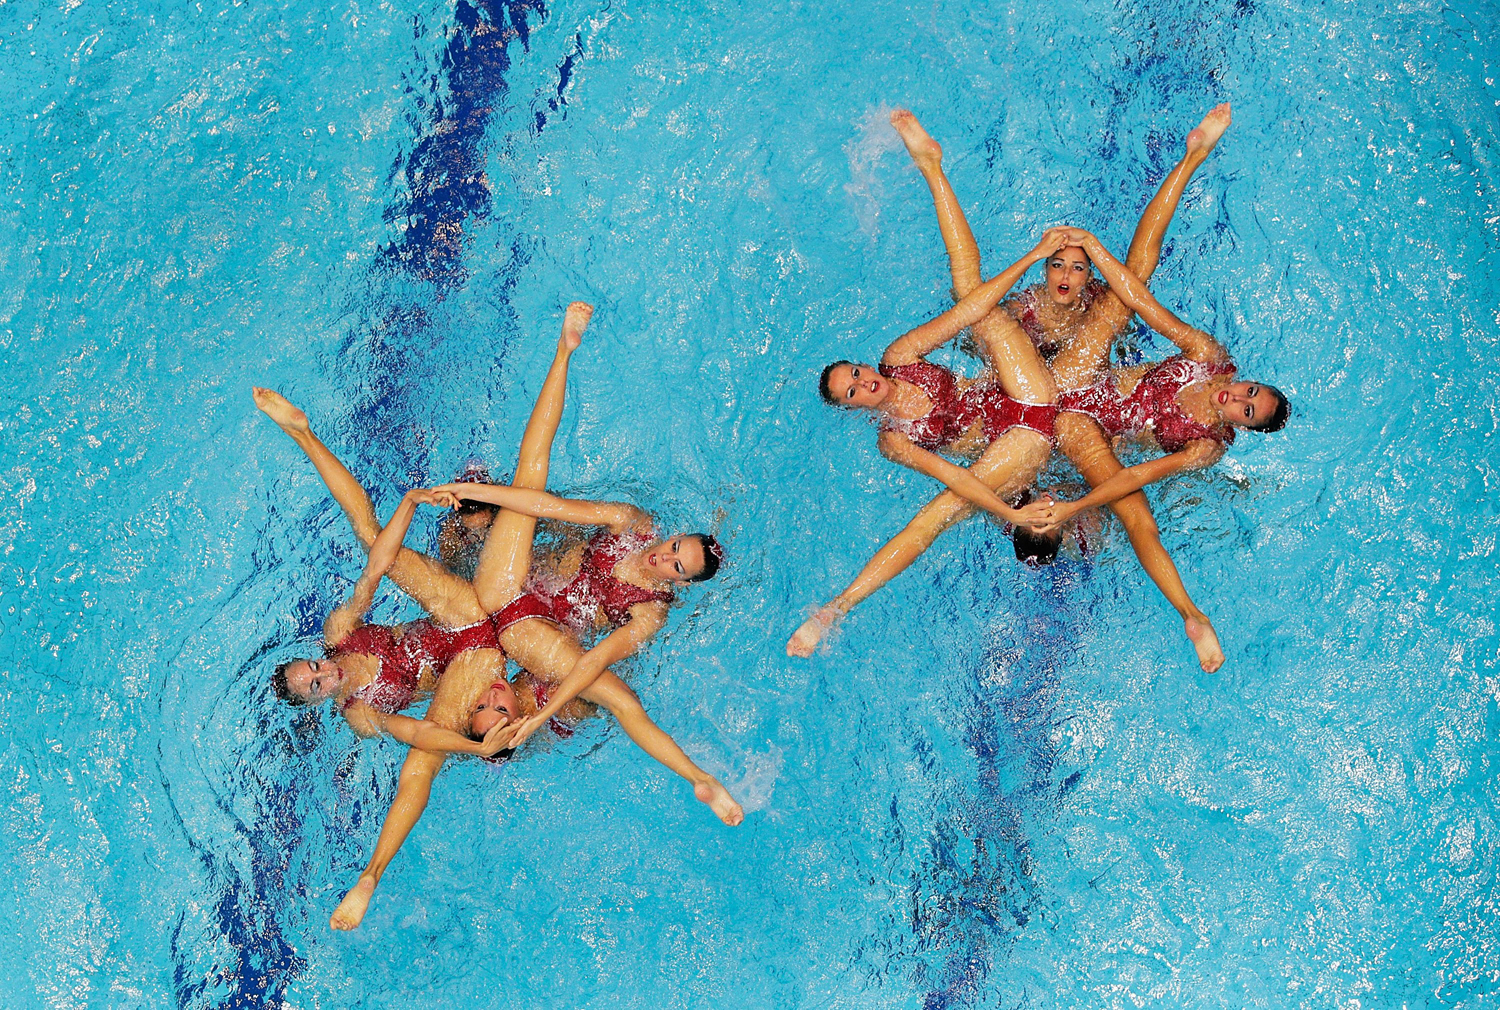 Aug. 14, 2014. Spain perform during the Womens Synchronised Swimming Free Routine at Europa-Sportpark in Berlin, Germany.